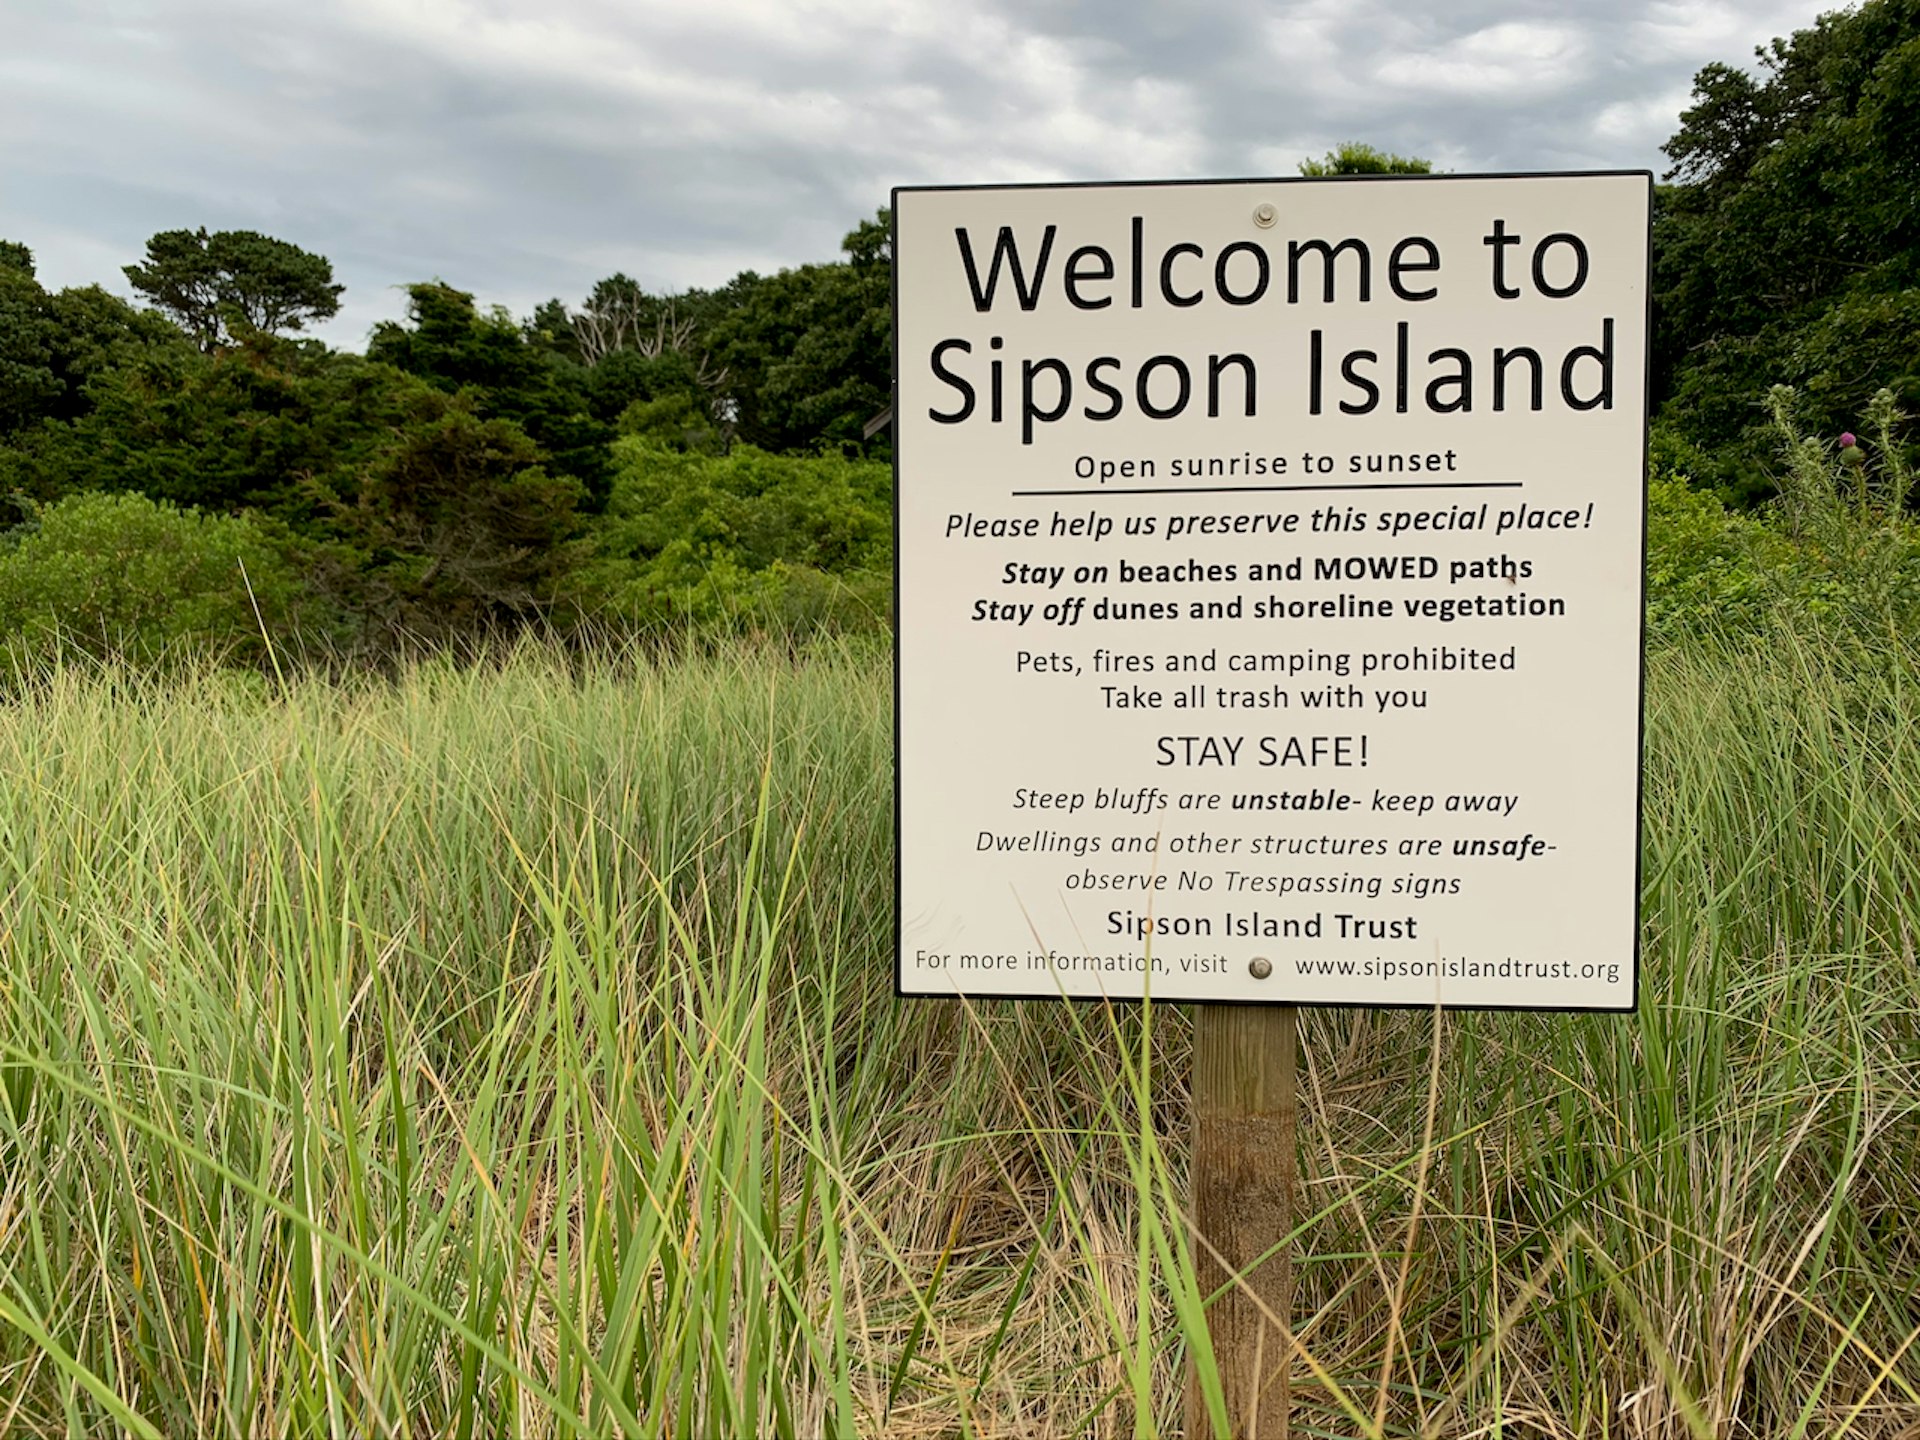 The welcome sign on Sipson Island 1